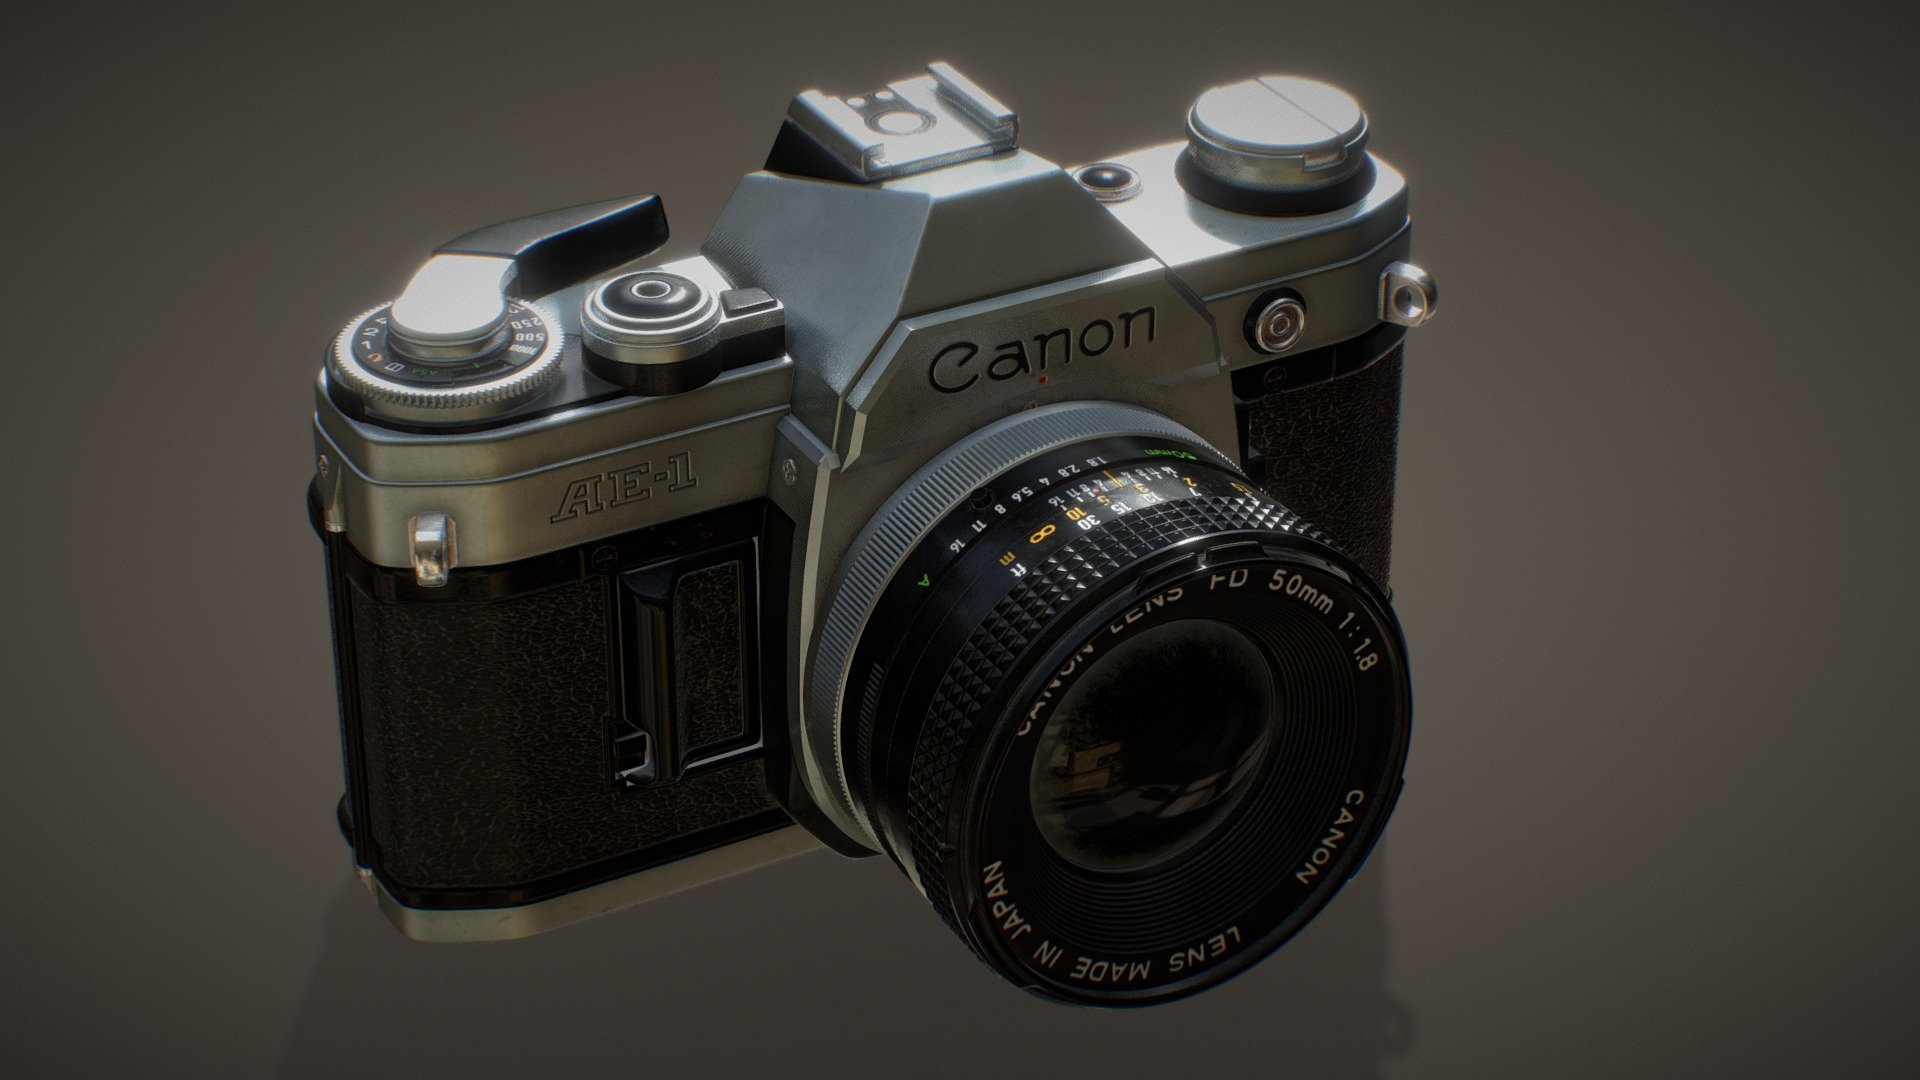 Retro Analog Camera Canon AE-1

Kindly comment below if you like to buy a low-res baked version(game asset ver).

Follow for more!

Instagram: instagram.com/brianlaiii

Artstation: artstation.com/brianlai93

Email: brianlai93@yahoo.com - Retro Camera - Canon AE-1 (HighRes) - Buy Royalty Free 3D model by Brian Lai (@BrianLaiii) 3d model